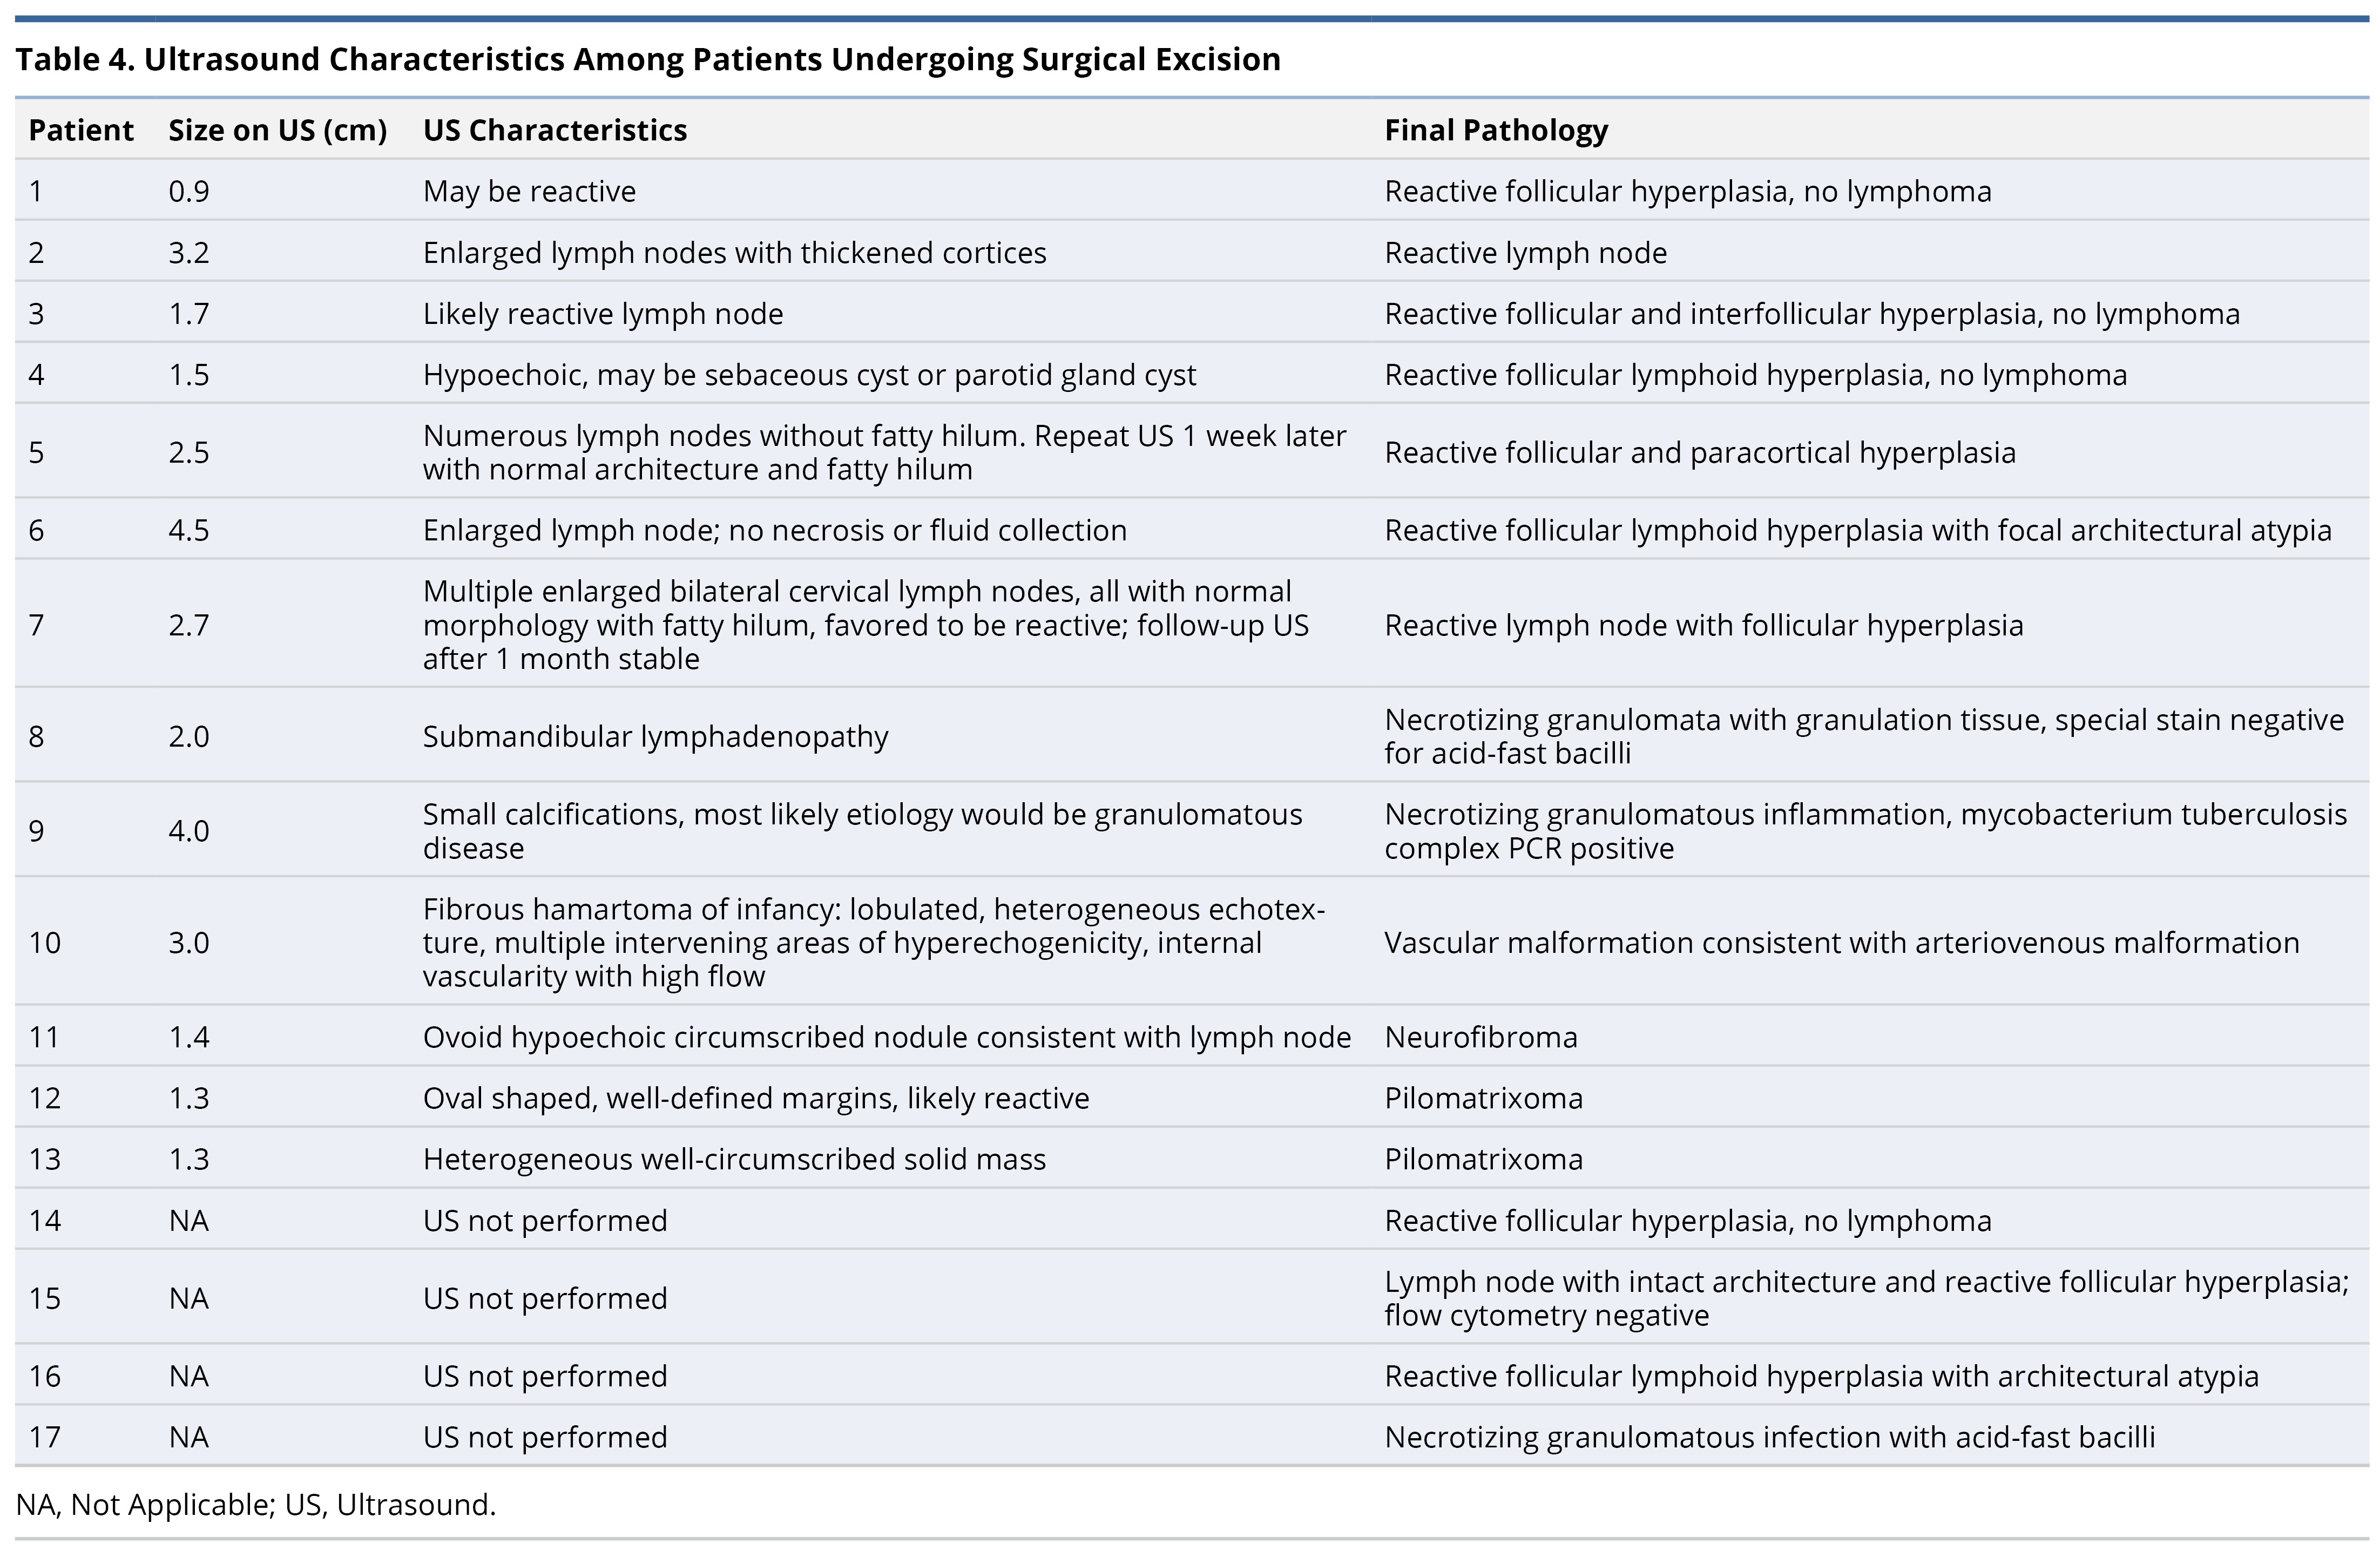 Table 4.jpgUltrasound characteristics among patients undergoing surgical excision.